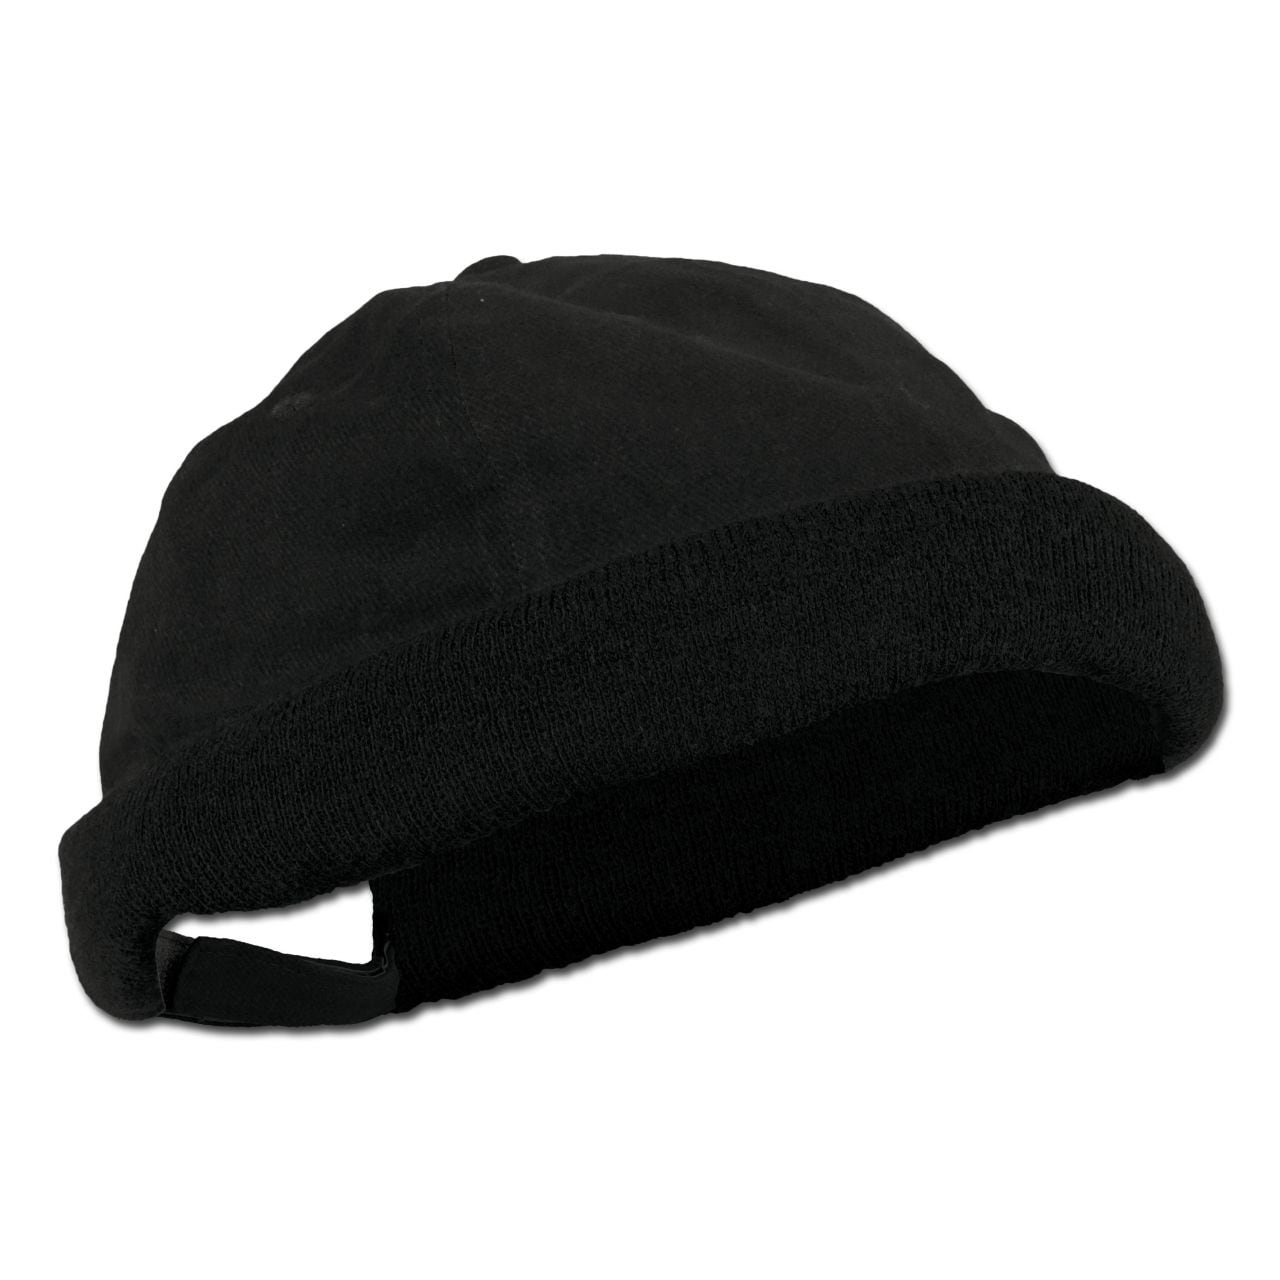 Purchase the Round Cap black by ASMC